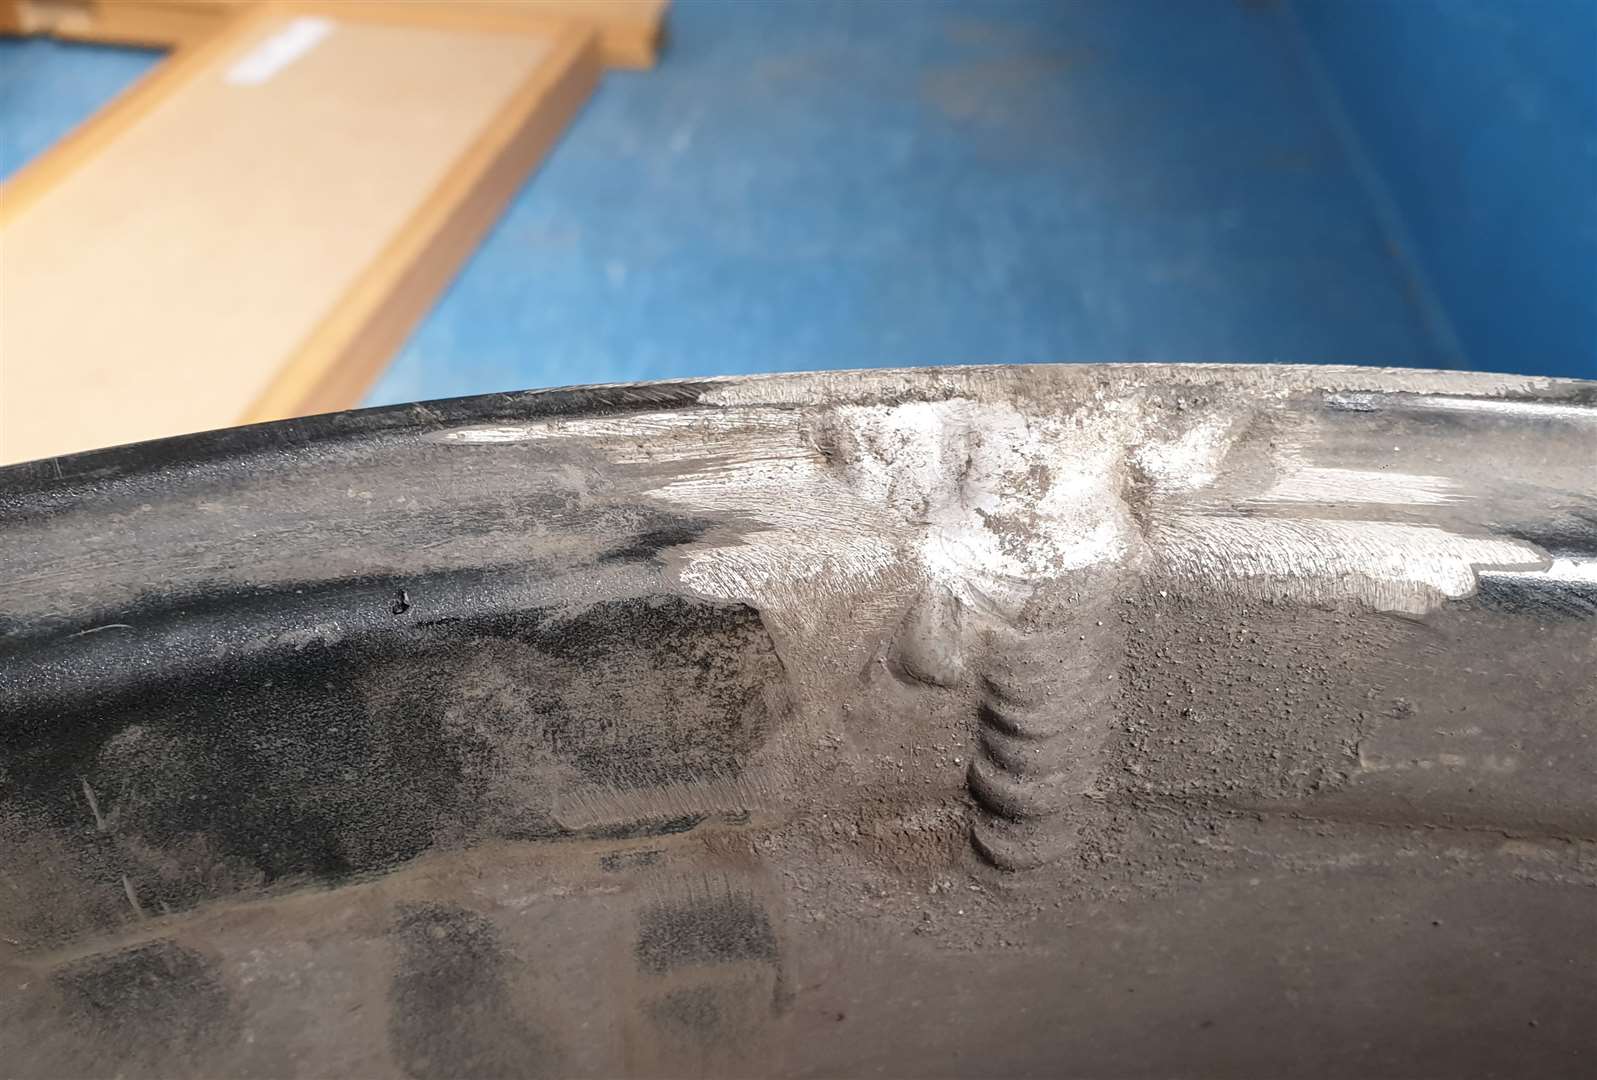 Damage caused to Mr Hunt's tyres